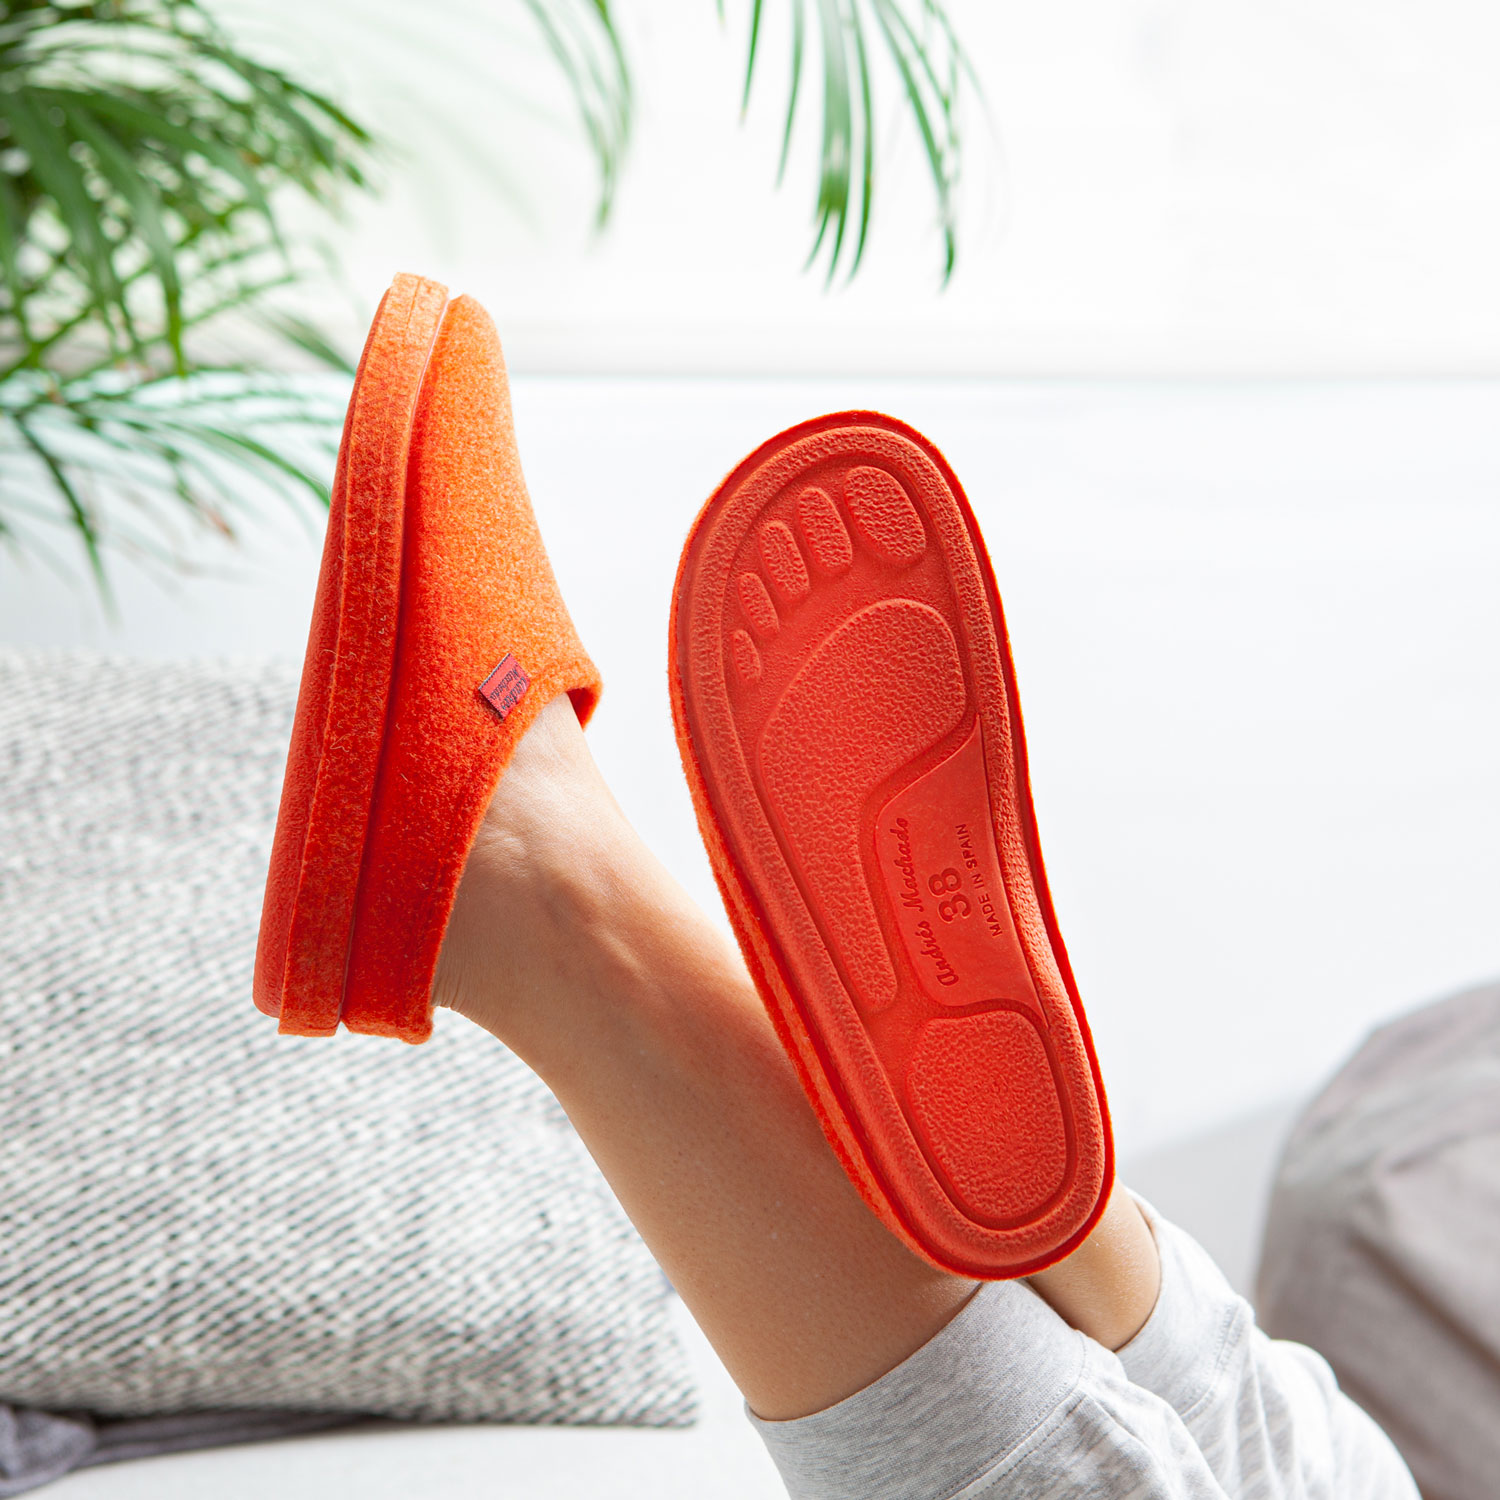 Very comfortable Orange Felt Slippers with footbed 